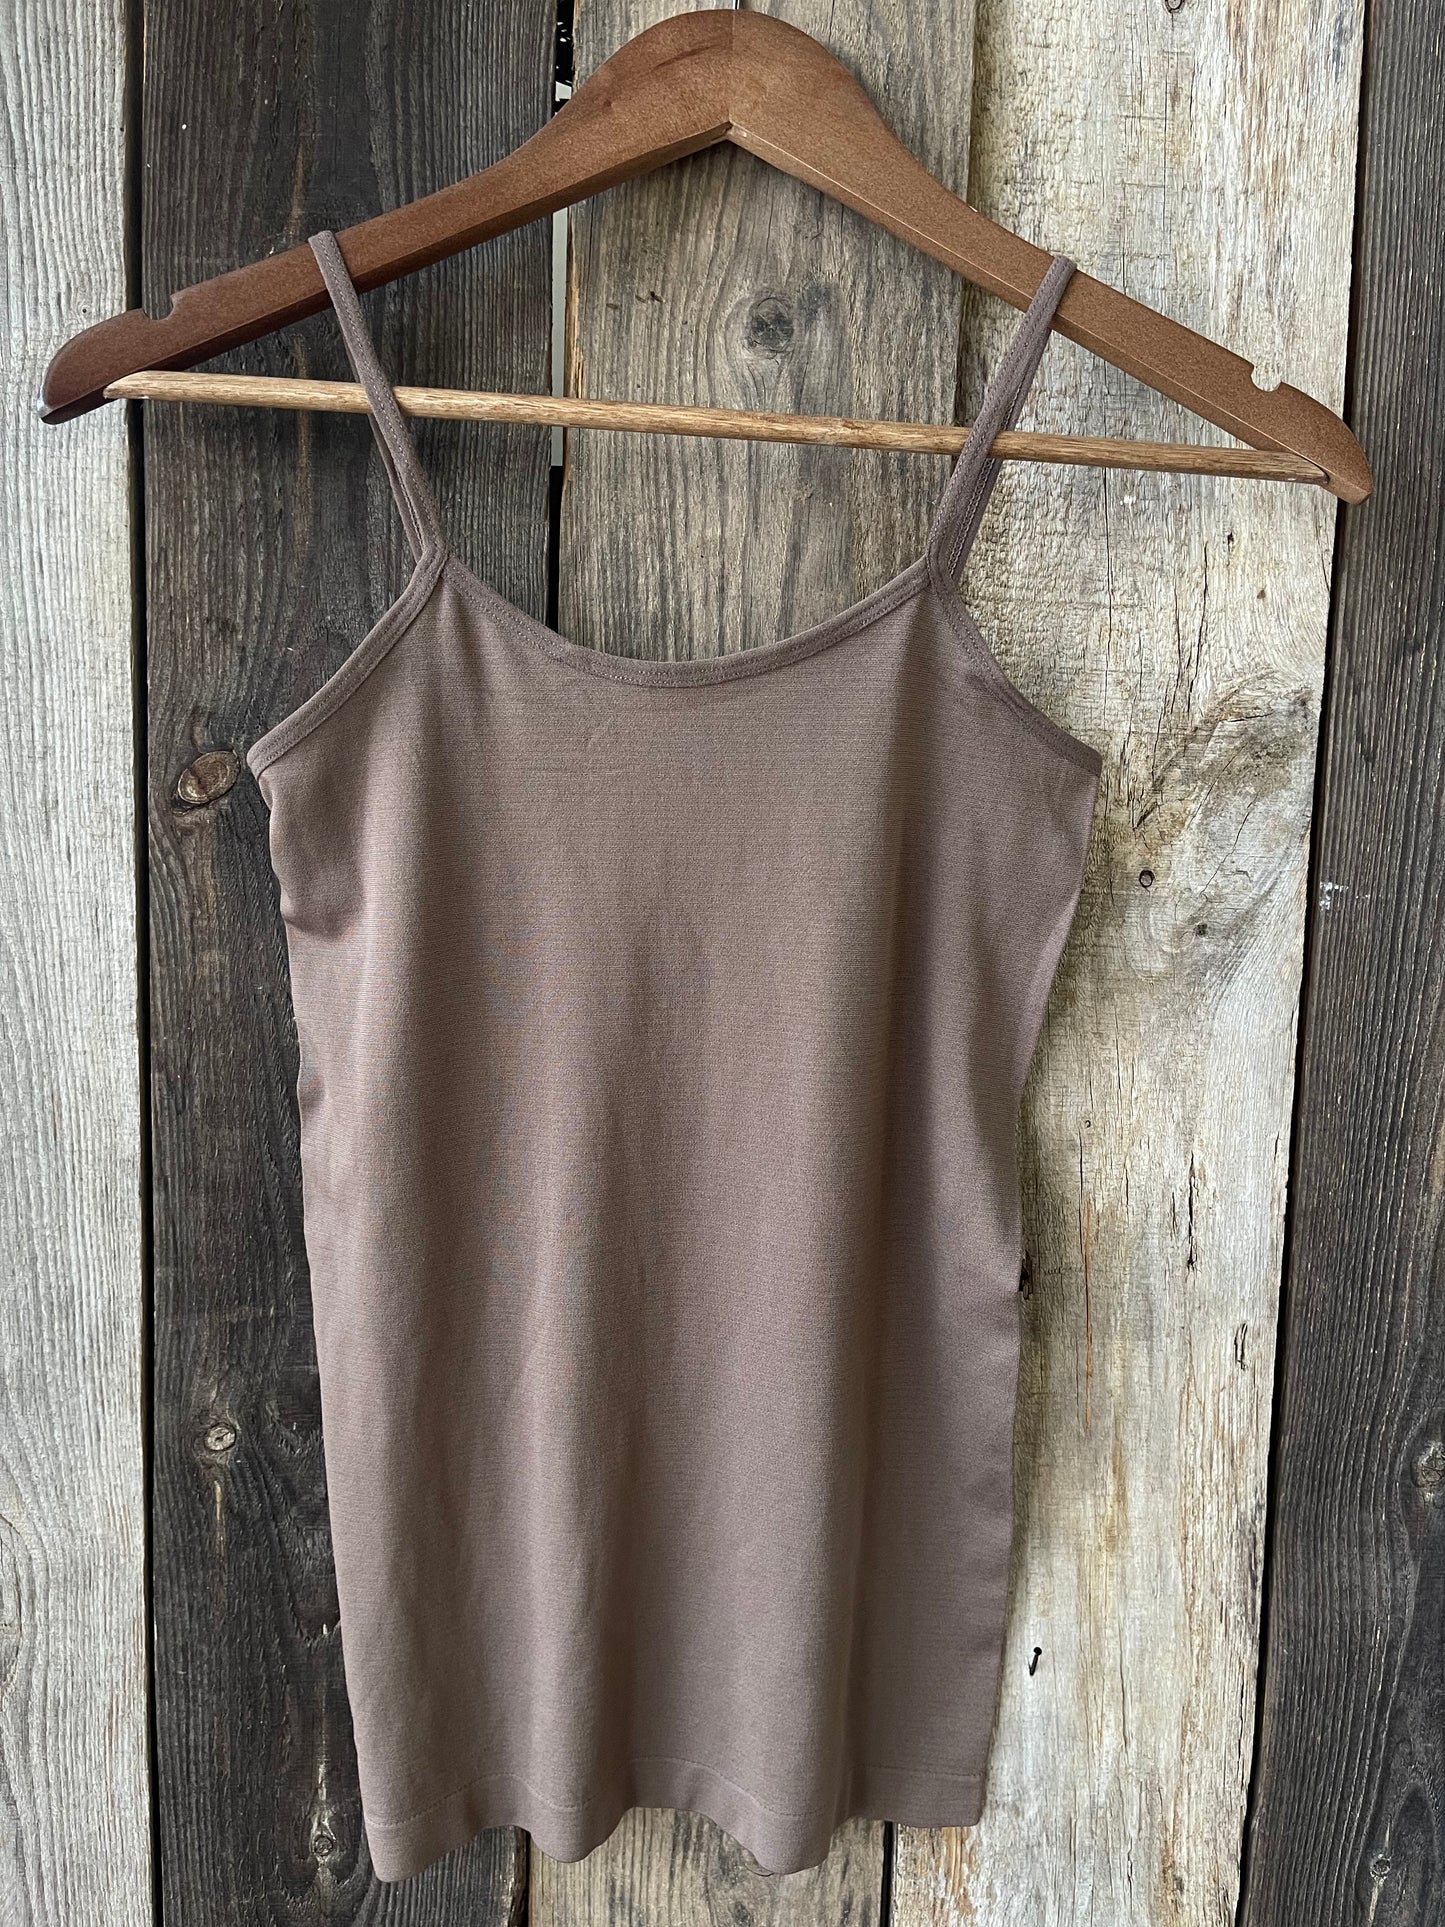 The Perfect Cami - Asst. Colors